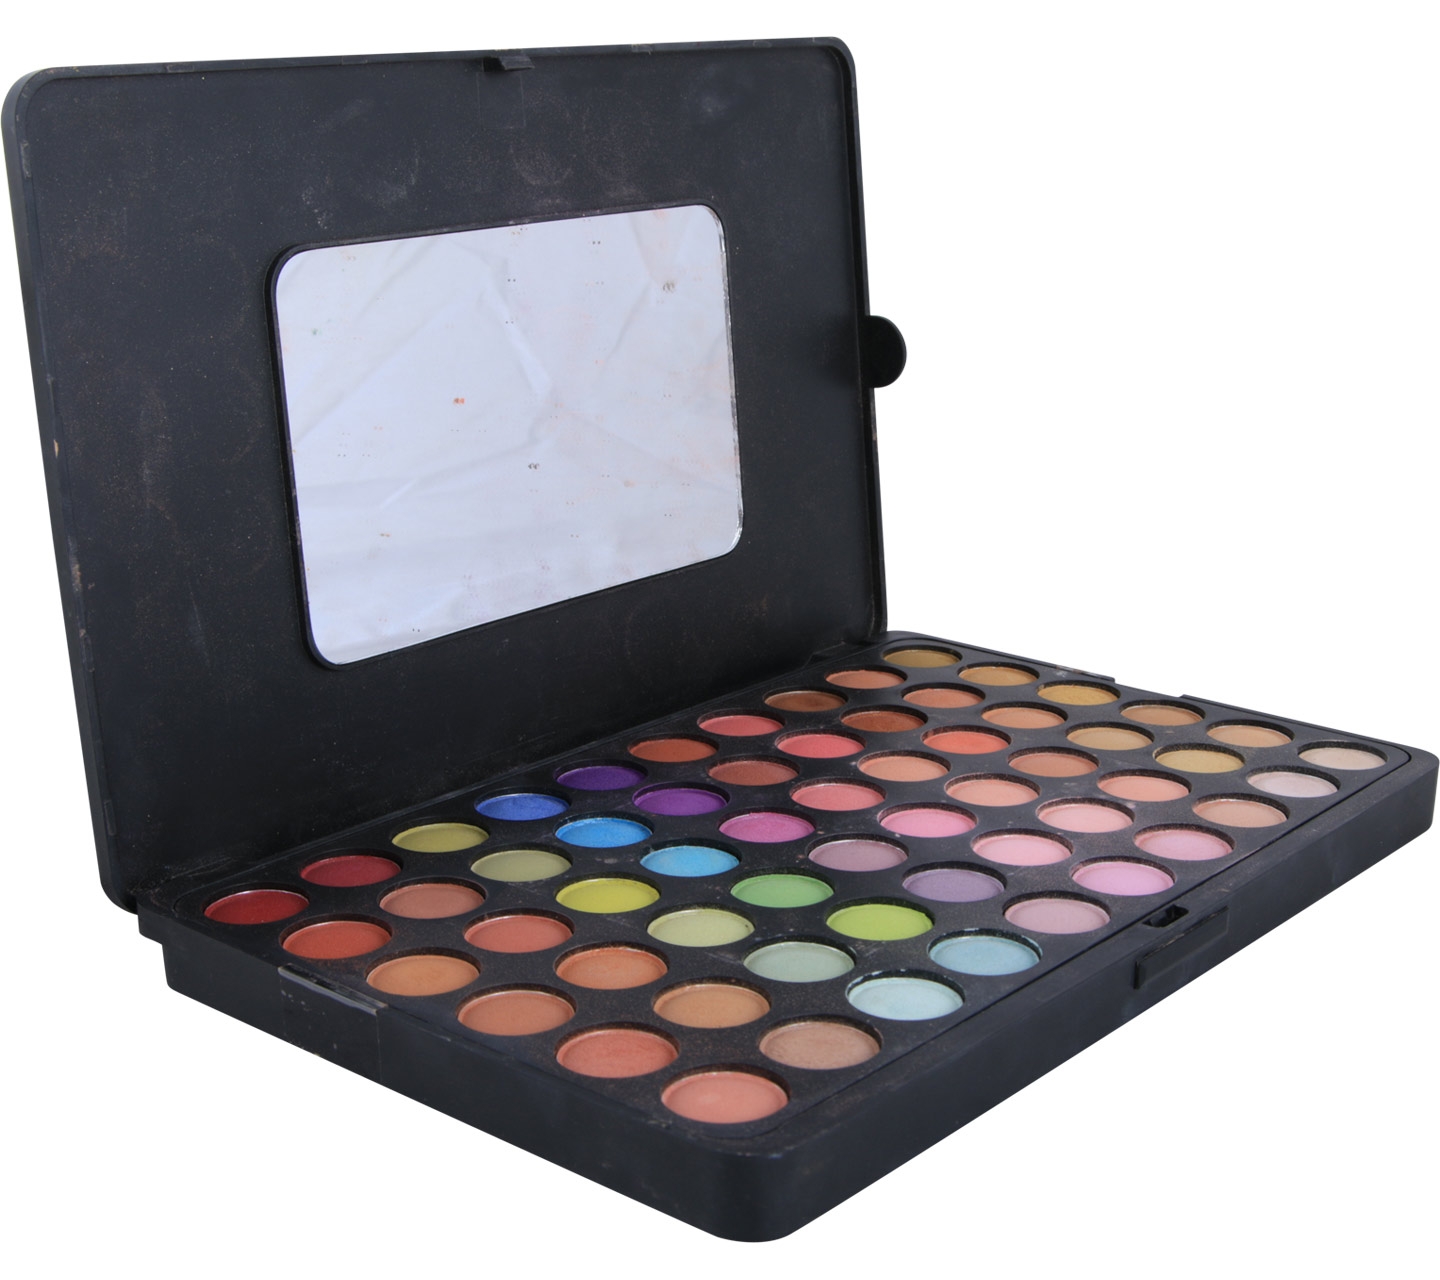 Bhcosmetics 3rd Edition 120 Color Palette Eye Shadow Sets and Palette